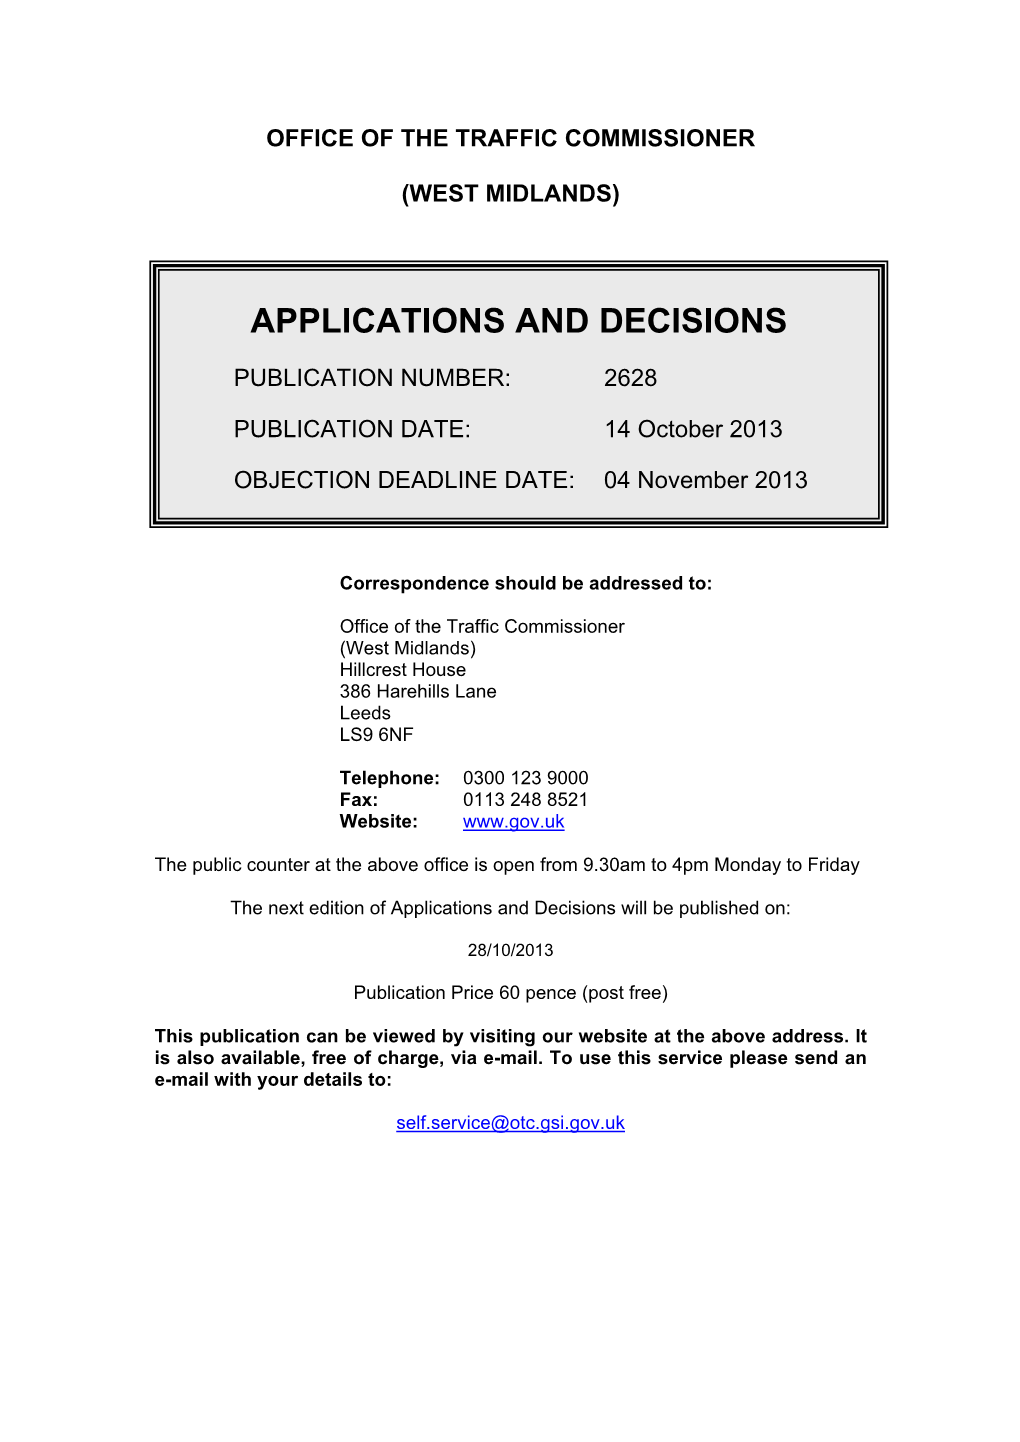 Applications and Decisions: West Midlands: 14 October 2013